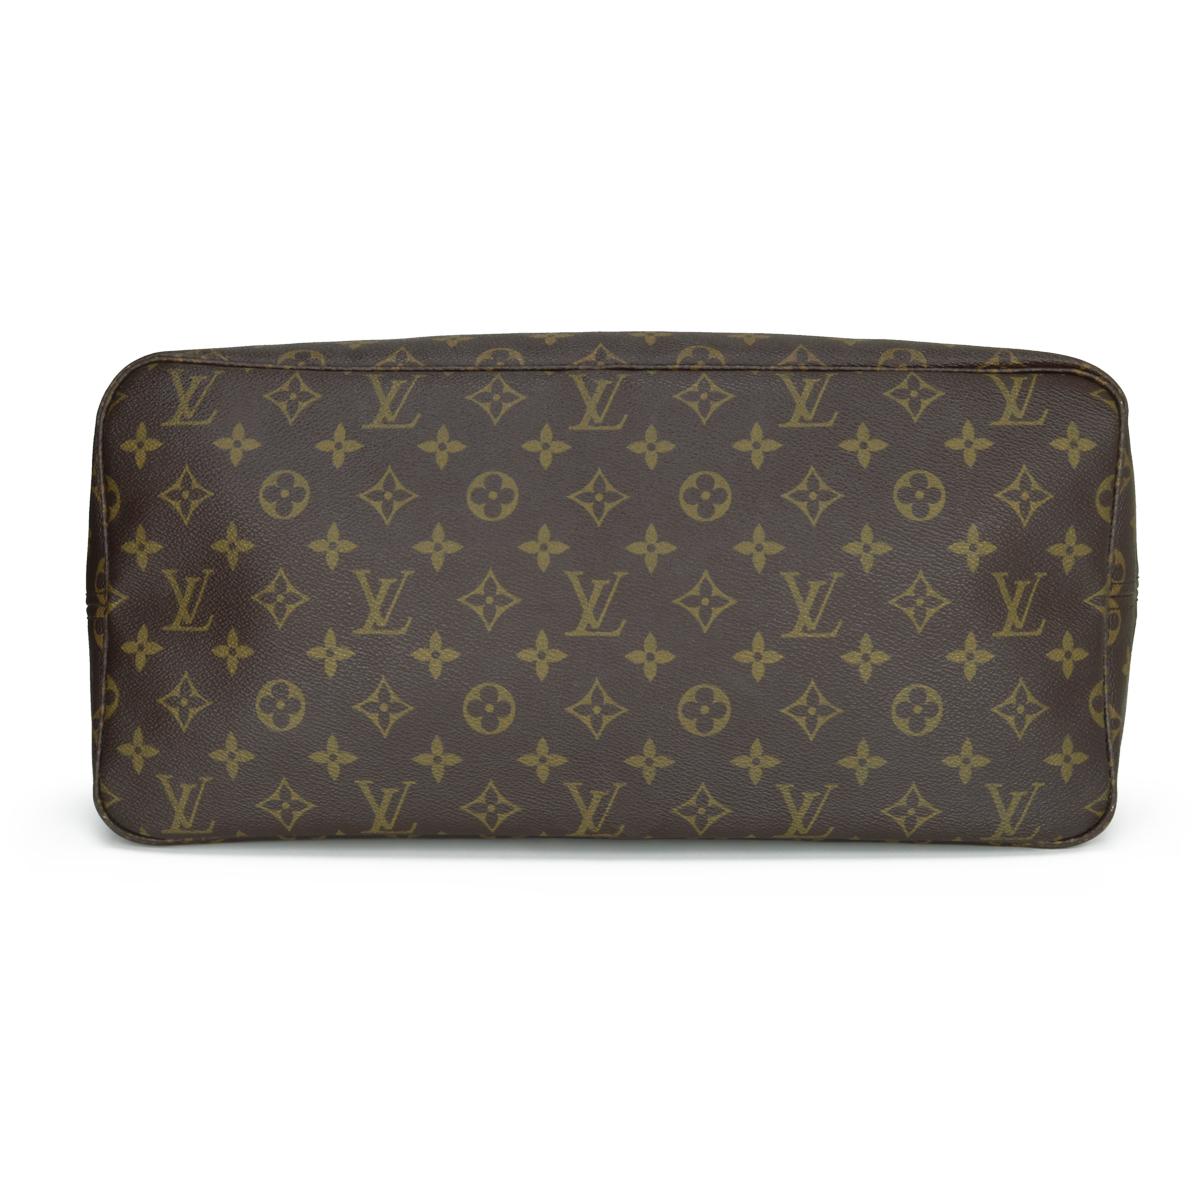 Louis Vuitton Neverfull GM Bag in Monogram with Beige Interior 2007 3